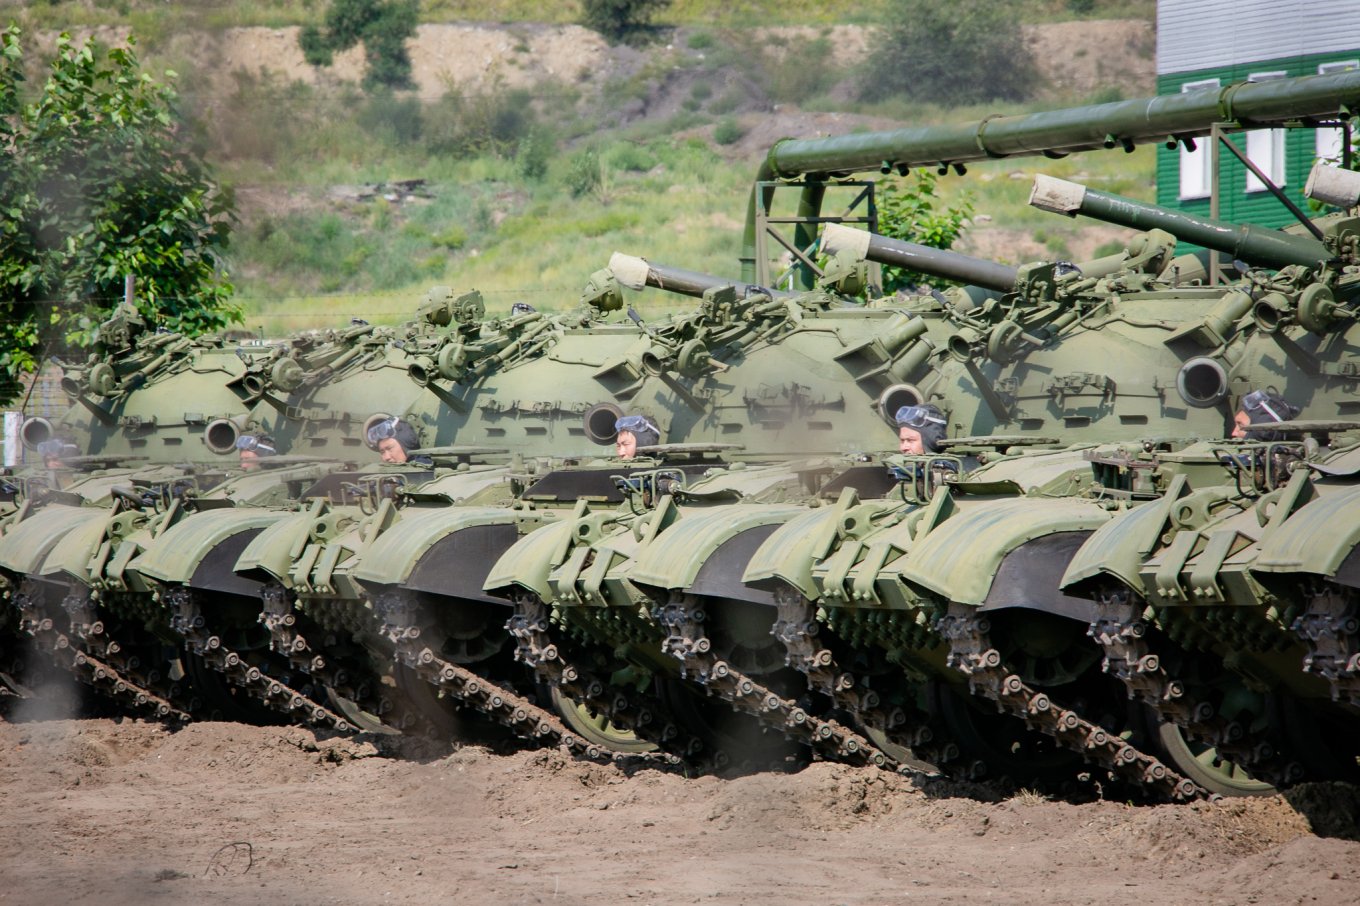 In 2018, the Russian Federation conducted training on the T-62M